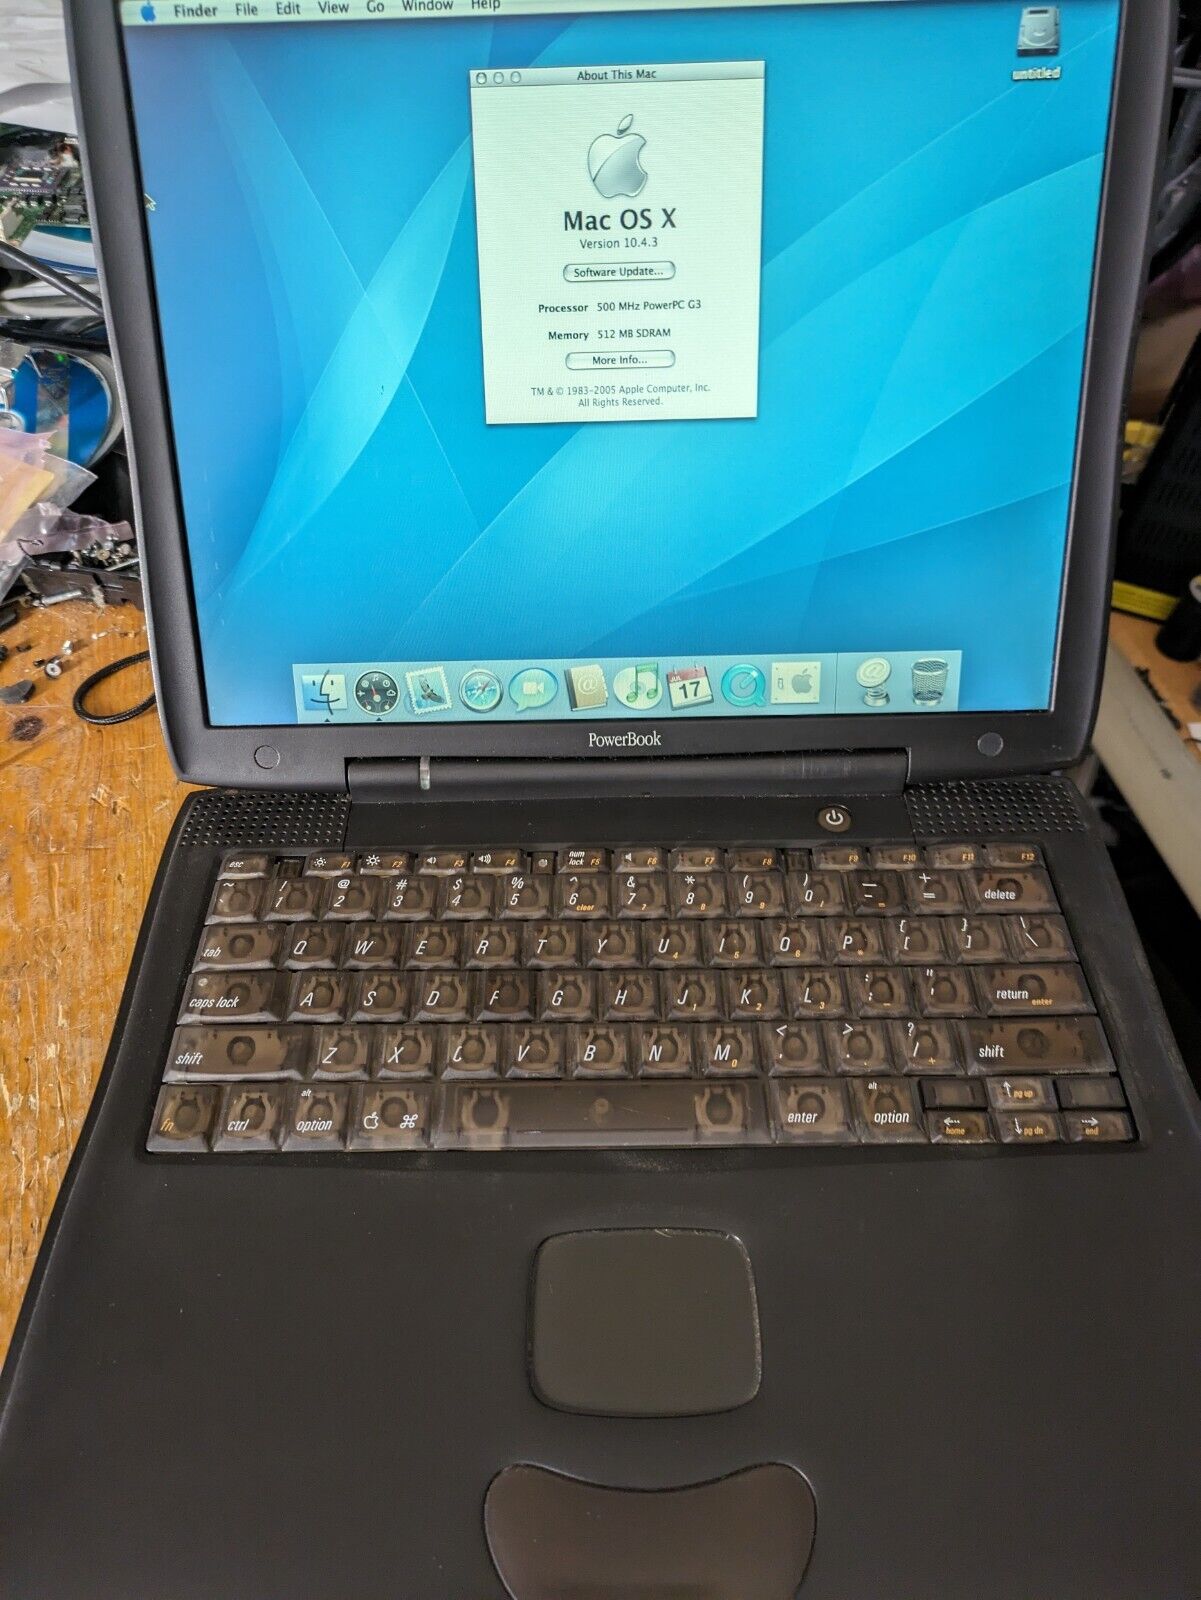 Apple PowerBook G3 Pismo 500mhz 40gb 512mb Combo Drive Dual Boot 9.2 / 10.4...